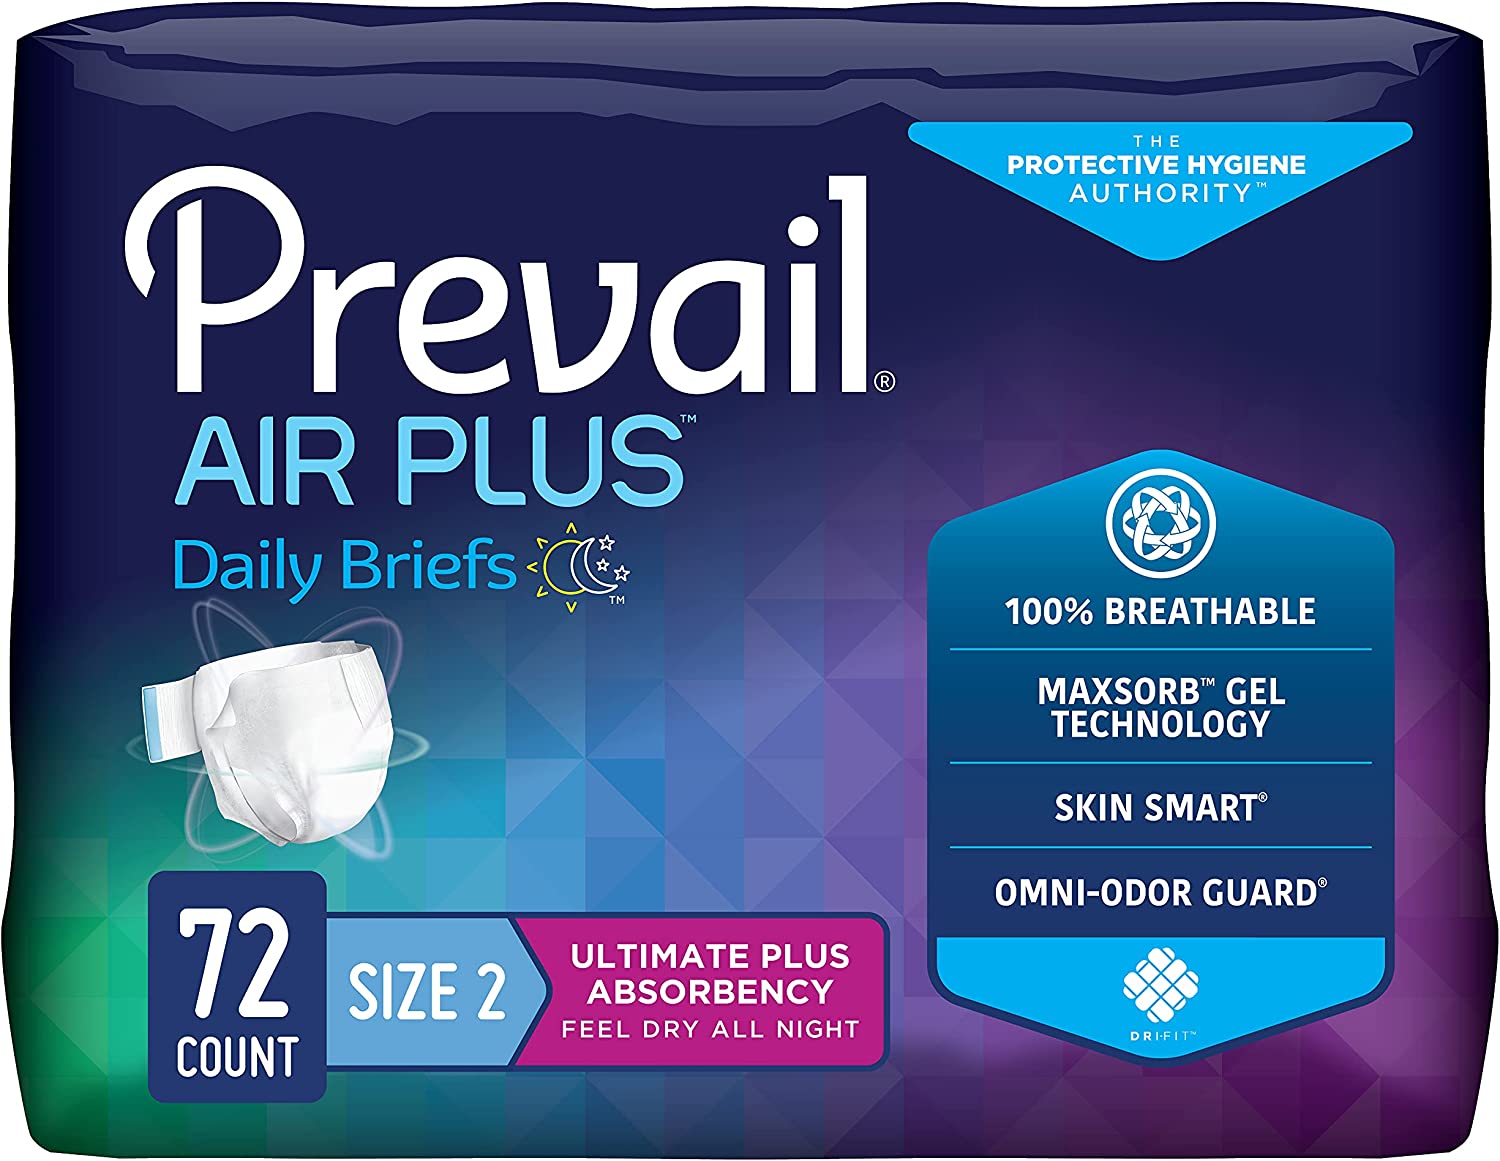 Shop Prevail Incontinence Products